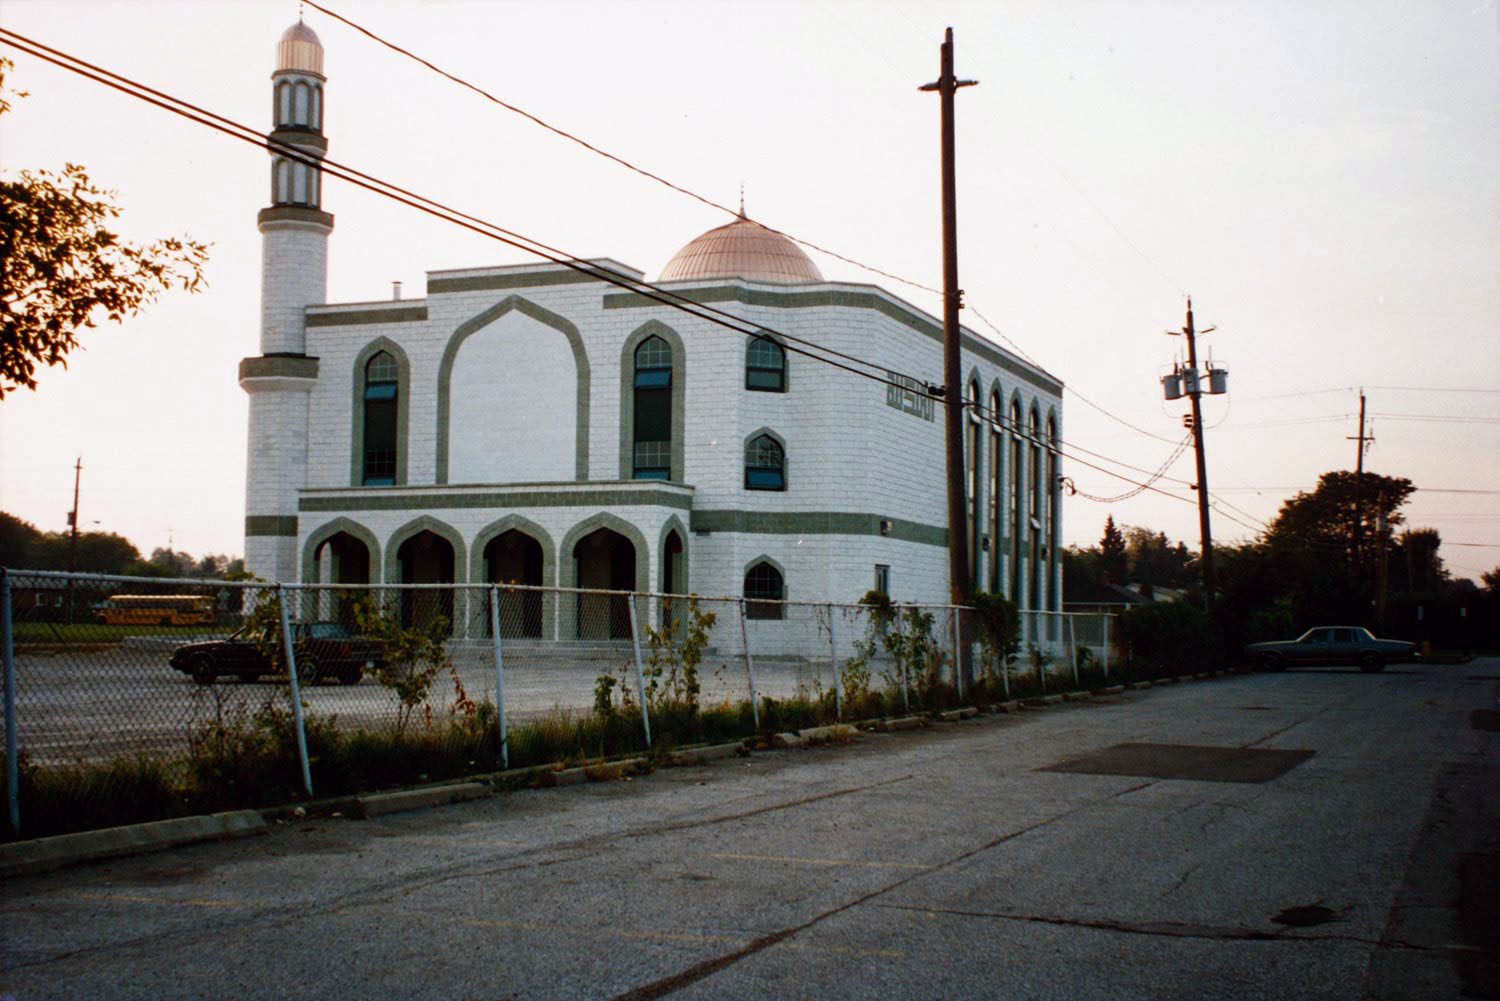 View to the northwest corner of the mosque, with the entrance to the new section of the mosque